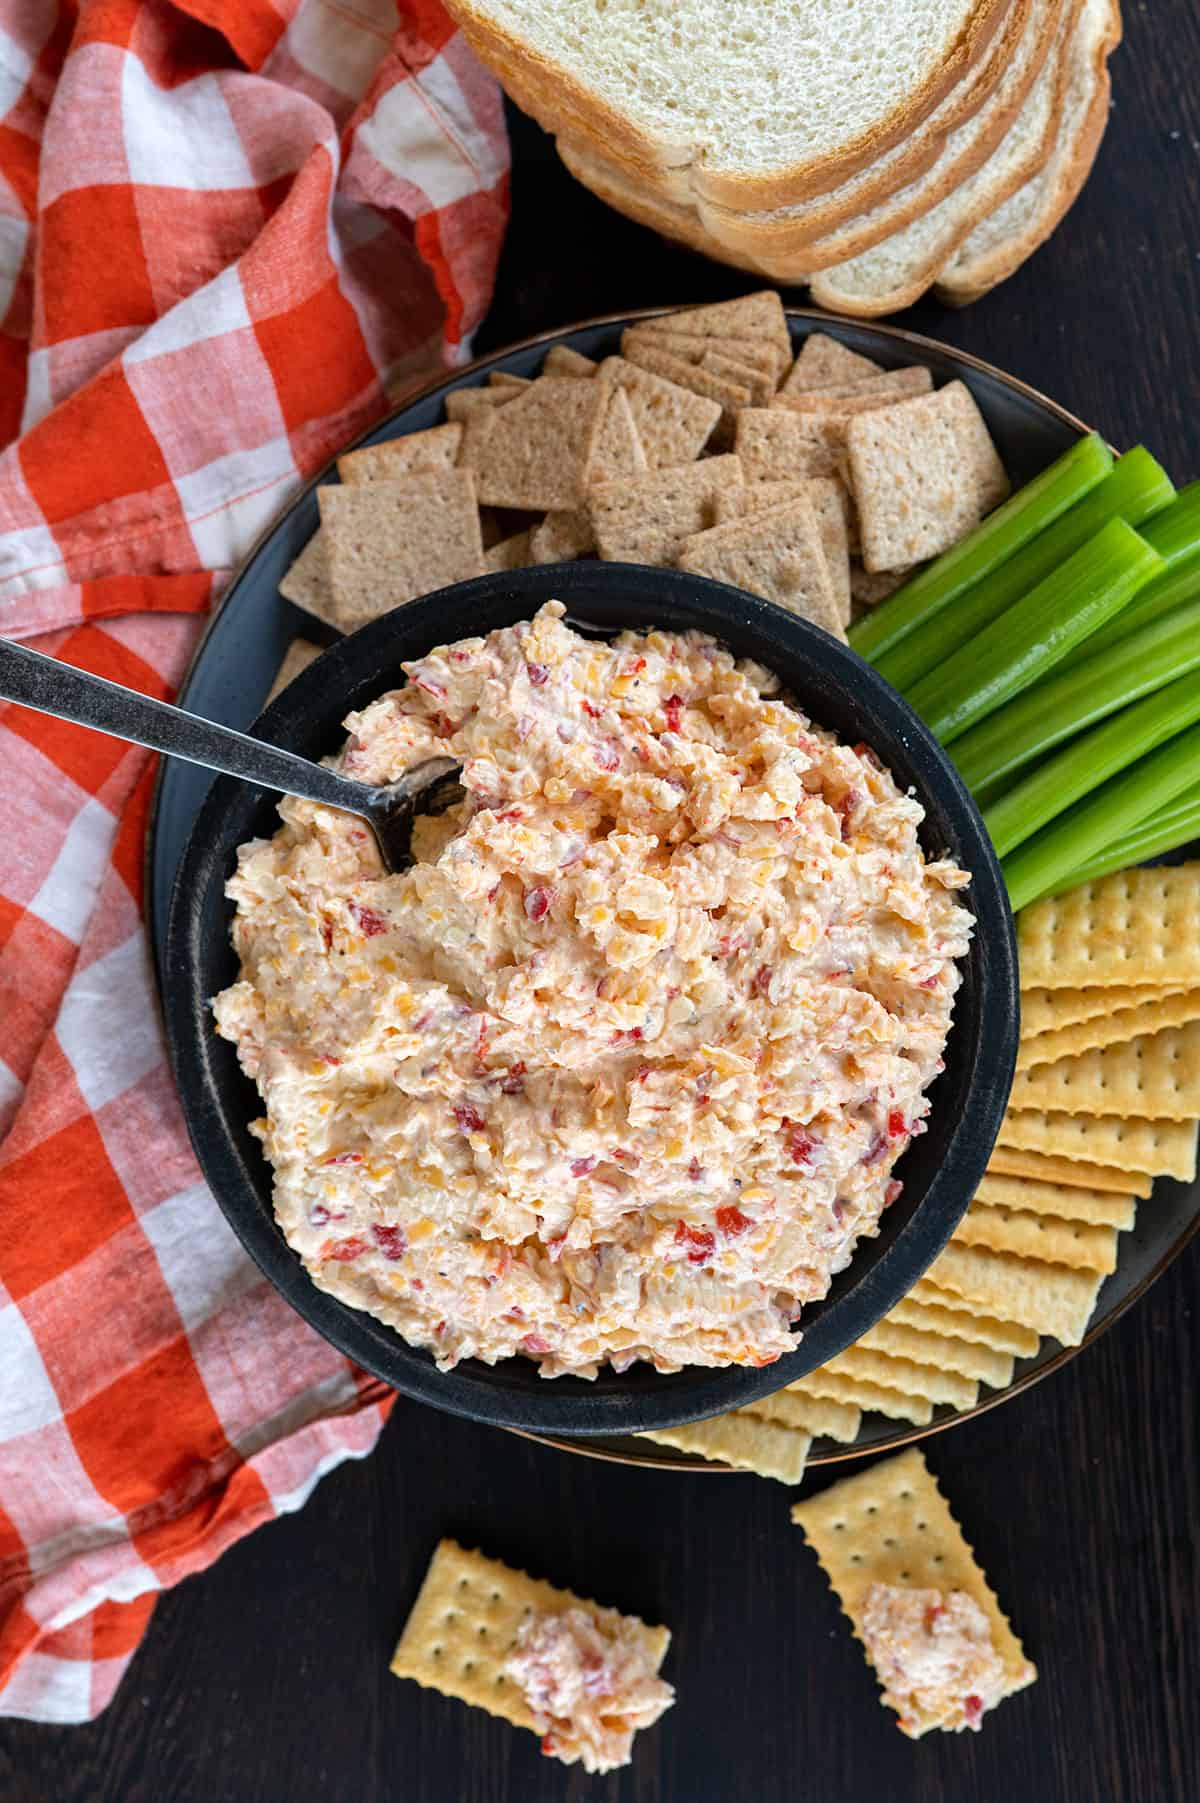 Overhead view of bowl of pimento cheese with crackers.